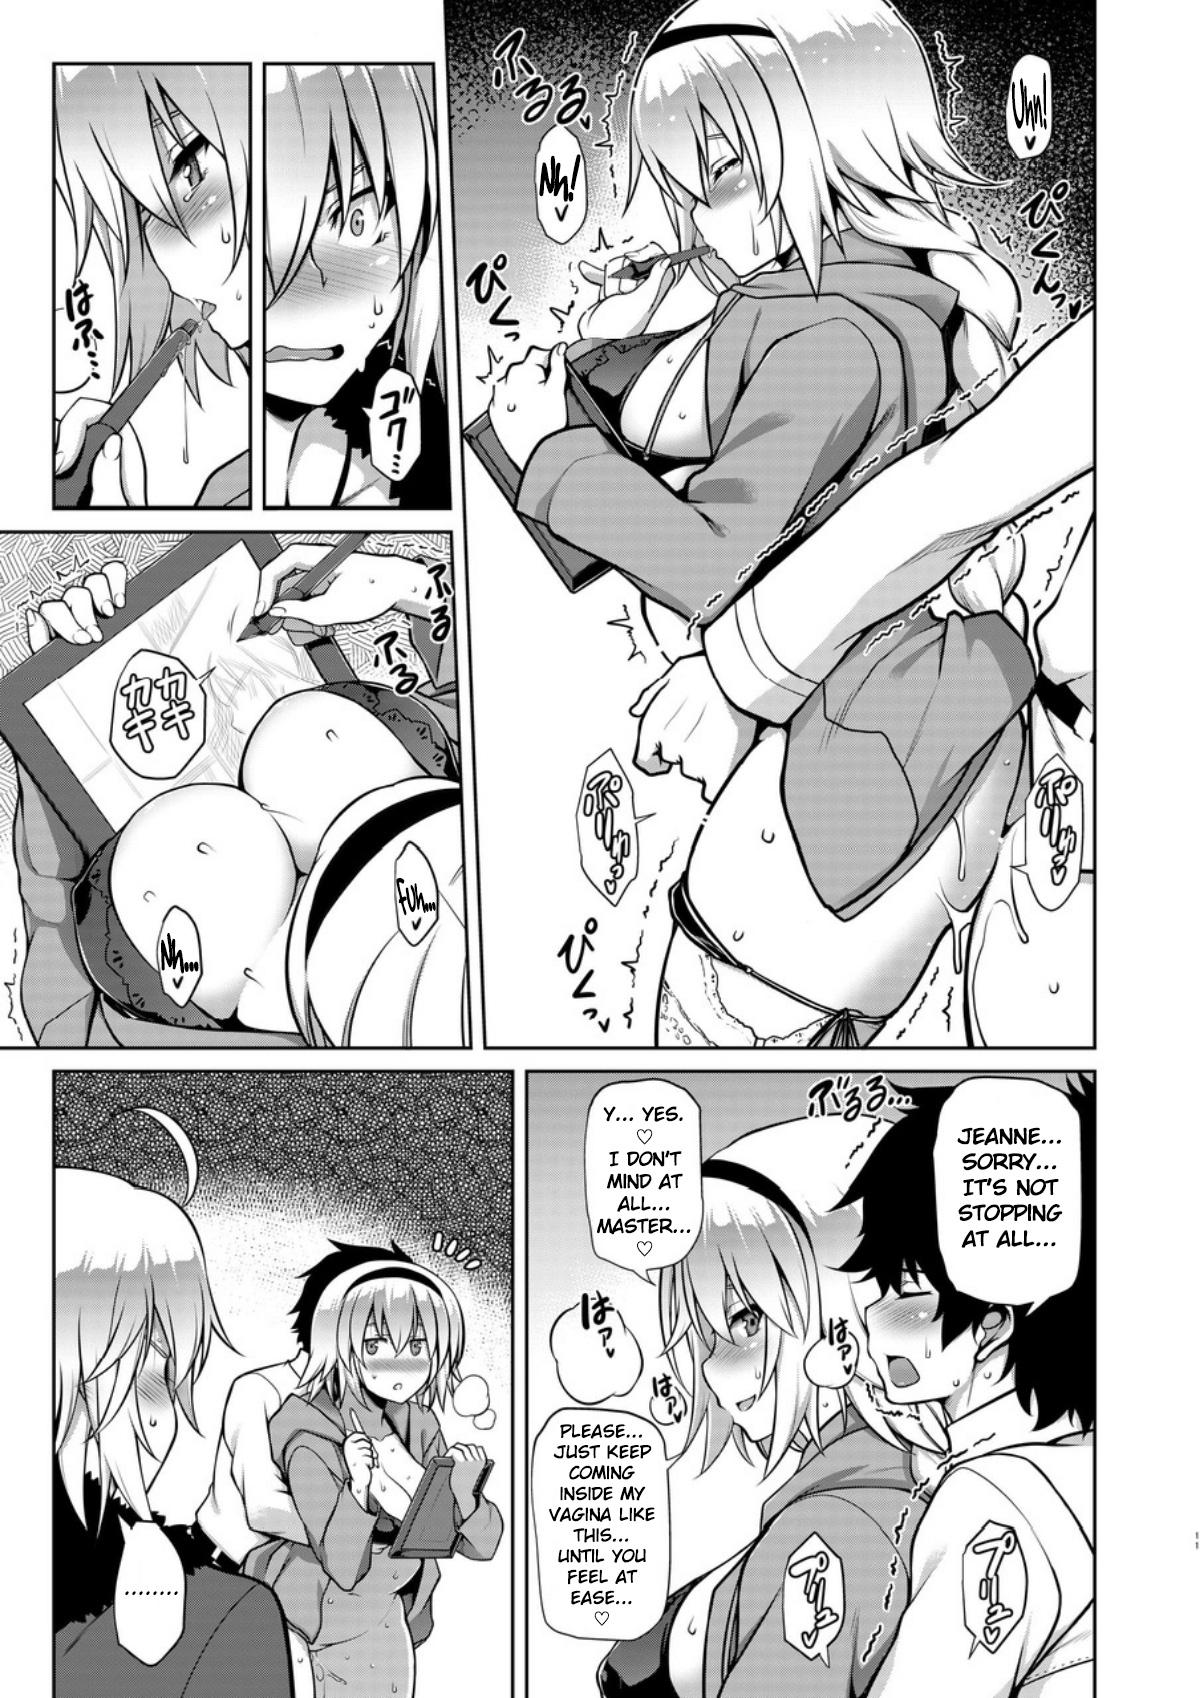 Young Tits Itezora no Summer Lady - Fate grand order Kink - Page 10